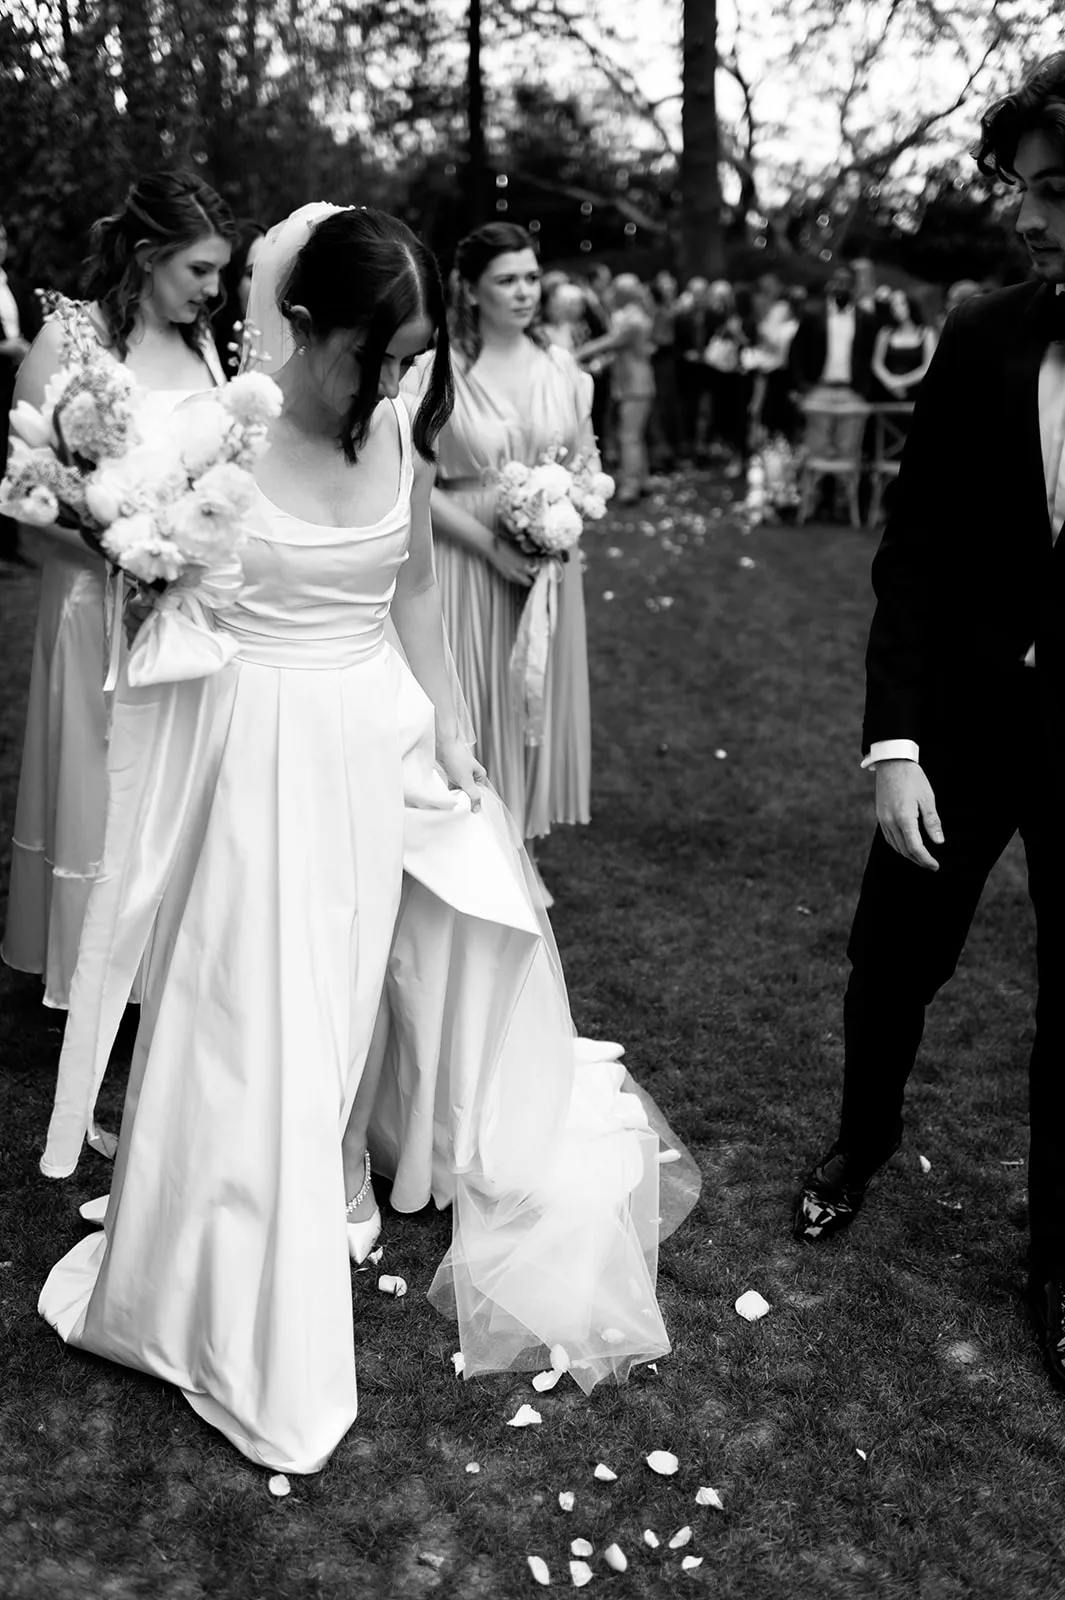 A black and white photo of a bride in a white gown holding her skirt, with bridesmaids behind her holding bouquets. A man in a tuxedo stands nearby. They are outdoors with blurred guests in the background. The ground is scattered with flower petals.